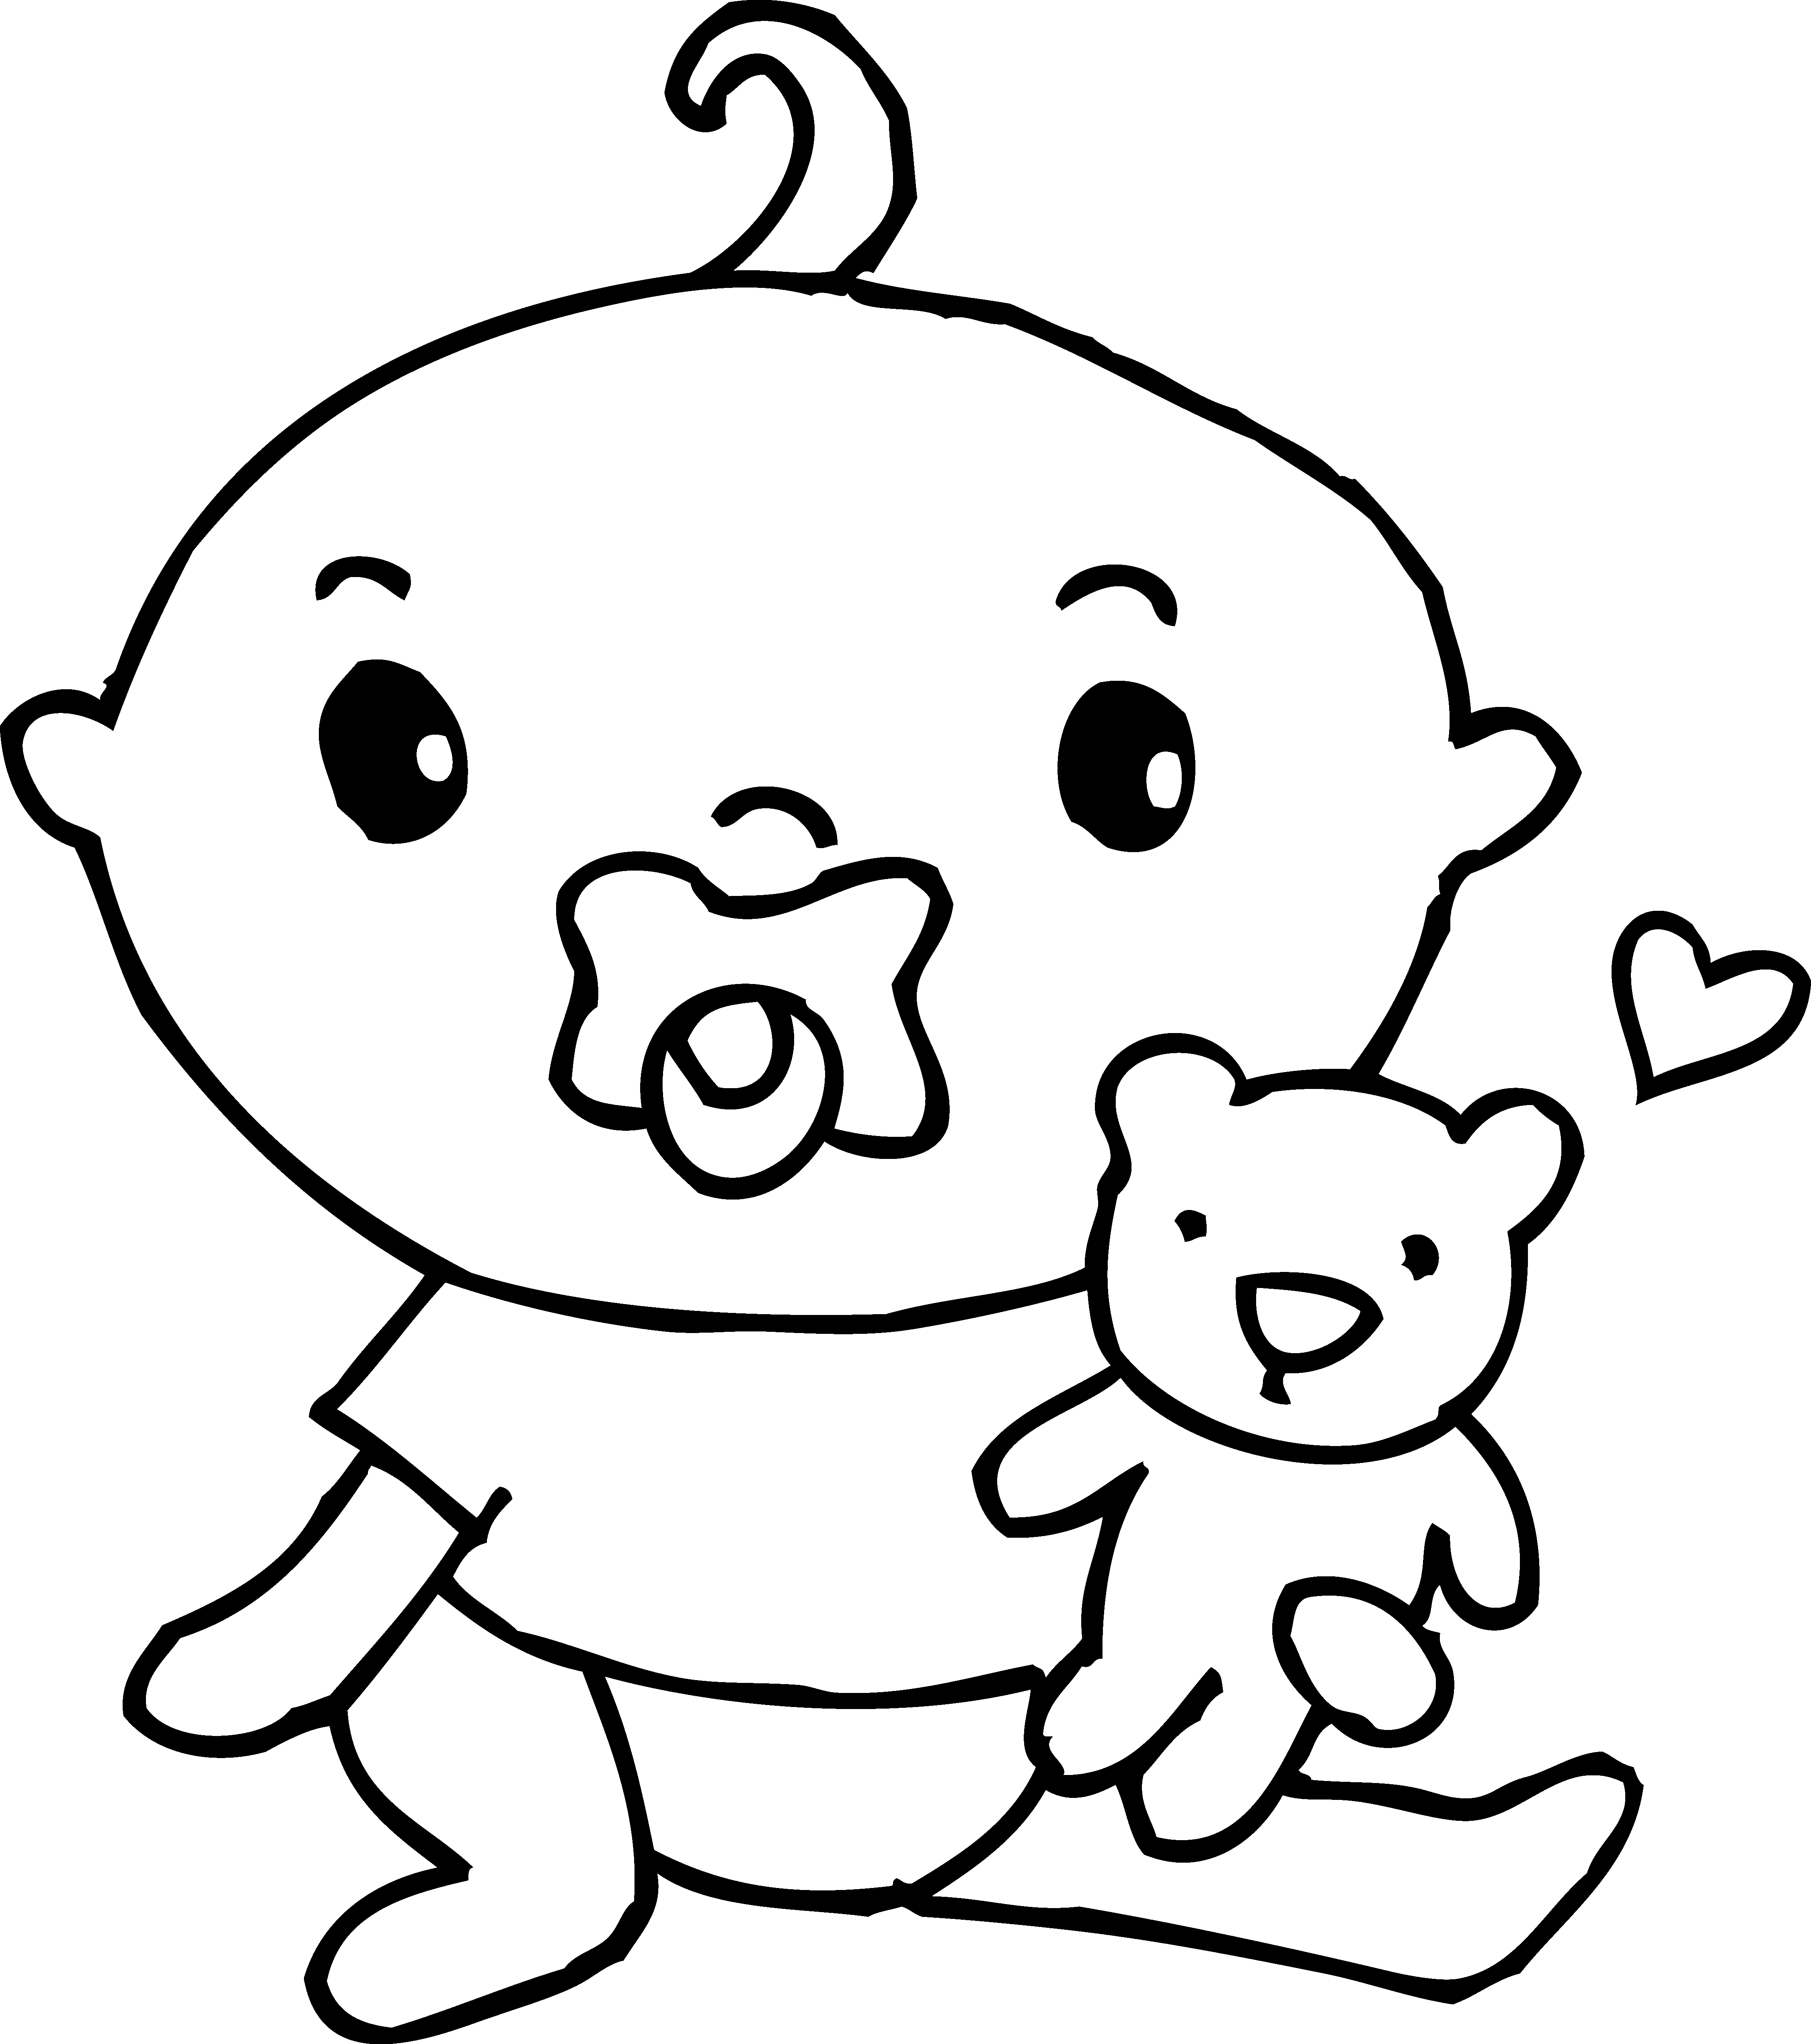 Cute baby boy free. Pacifier clipart coloring page